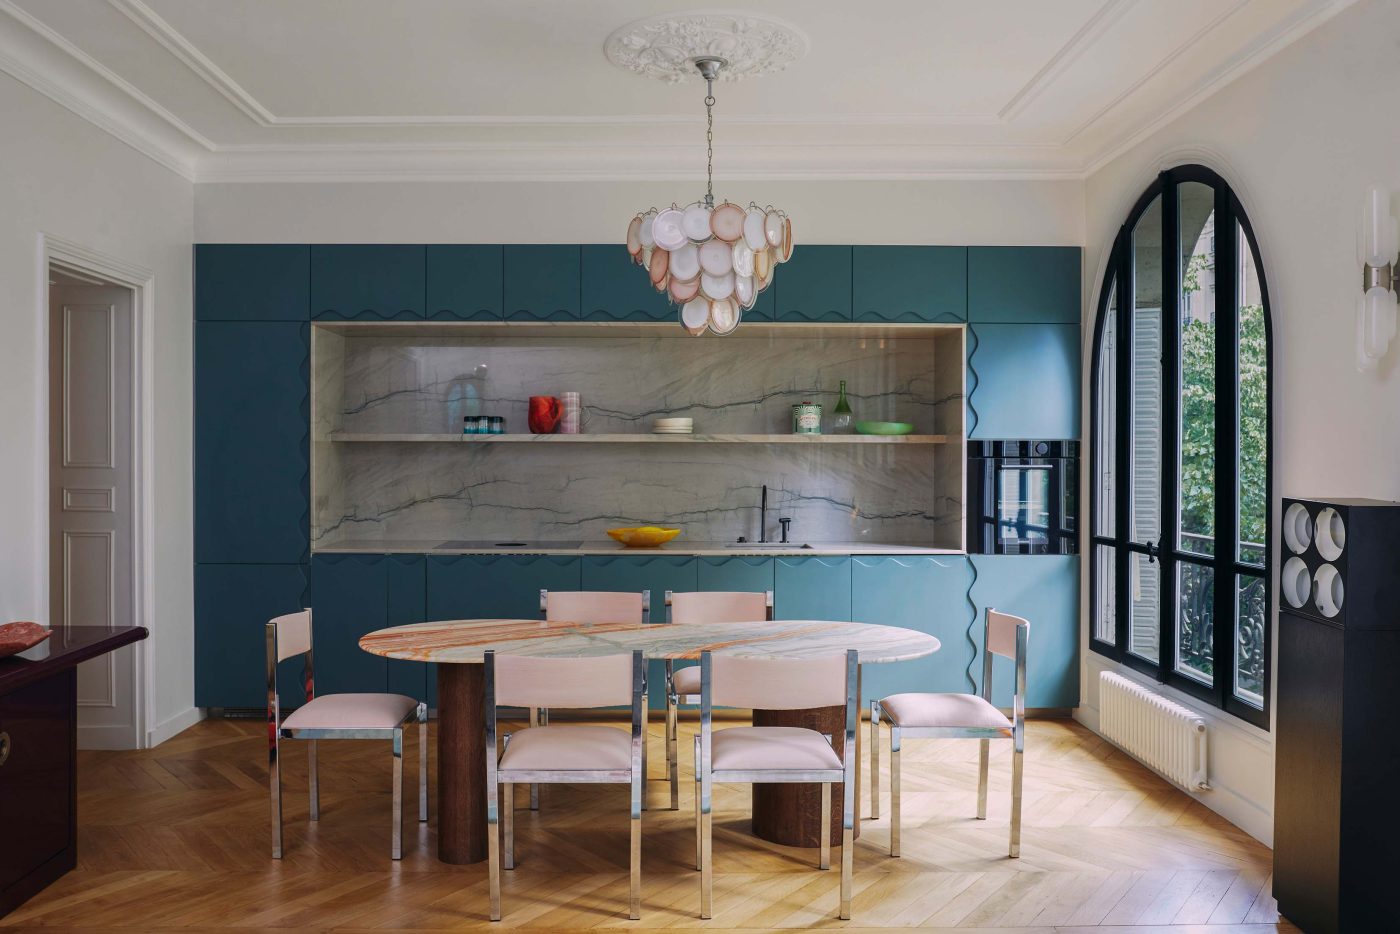 Sebban reveals his love for wave motifs in the kitchen cabinetry in an apartment he decorated in Paris’s 16th arrondissement.